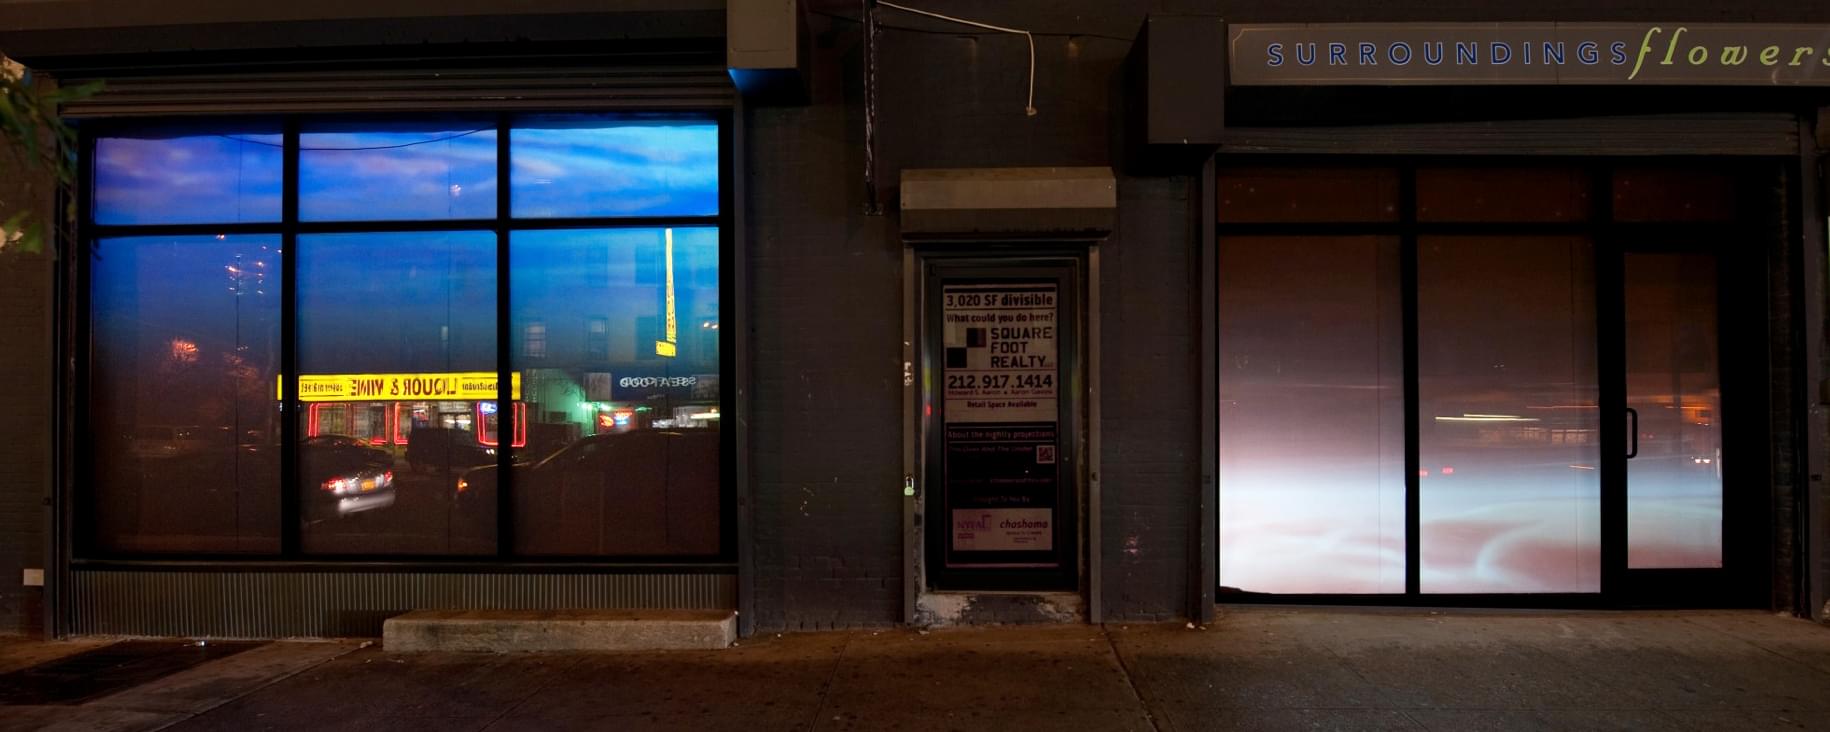 Nighttime photograph of two storefronts, one on each side of the frame, separated by an abandon-looking door in the middle. In the left storefront is projected an video of the surface of water, from below; reflected in the windows is a bright yellow awning of the liquor store across the street. In the right storefront is projected a violet-ish rendering of clouds as seen from above.